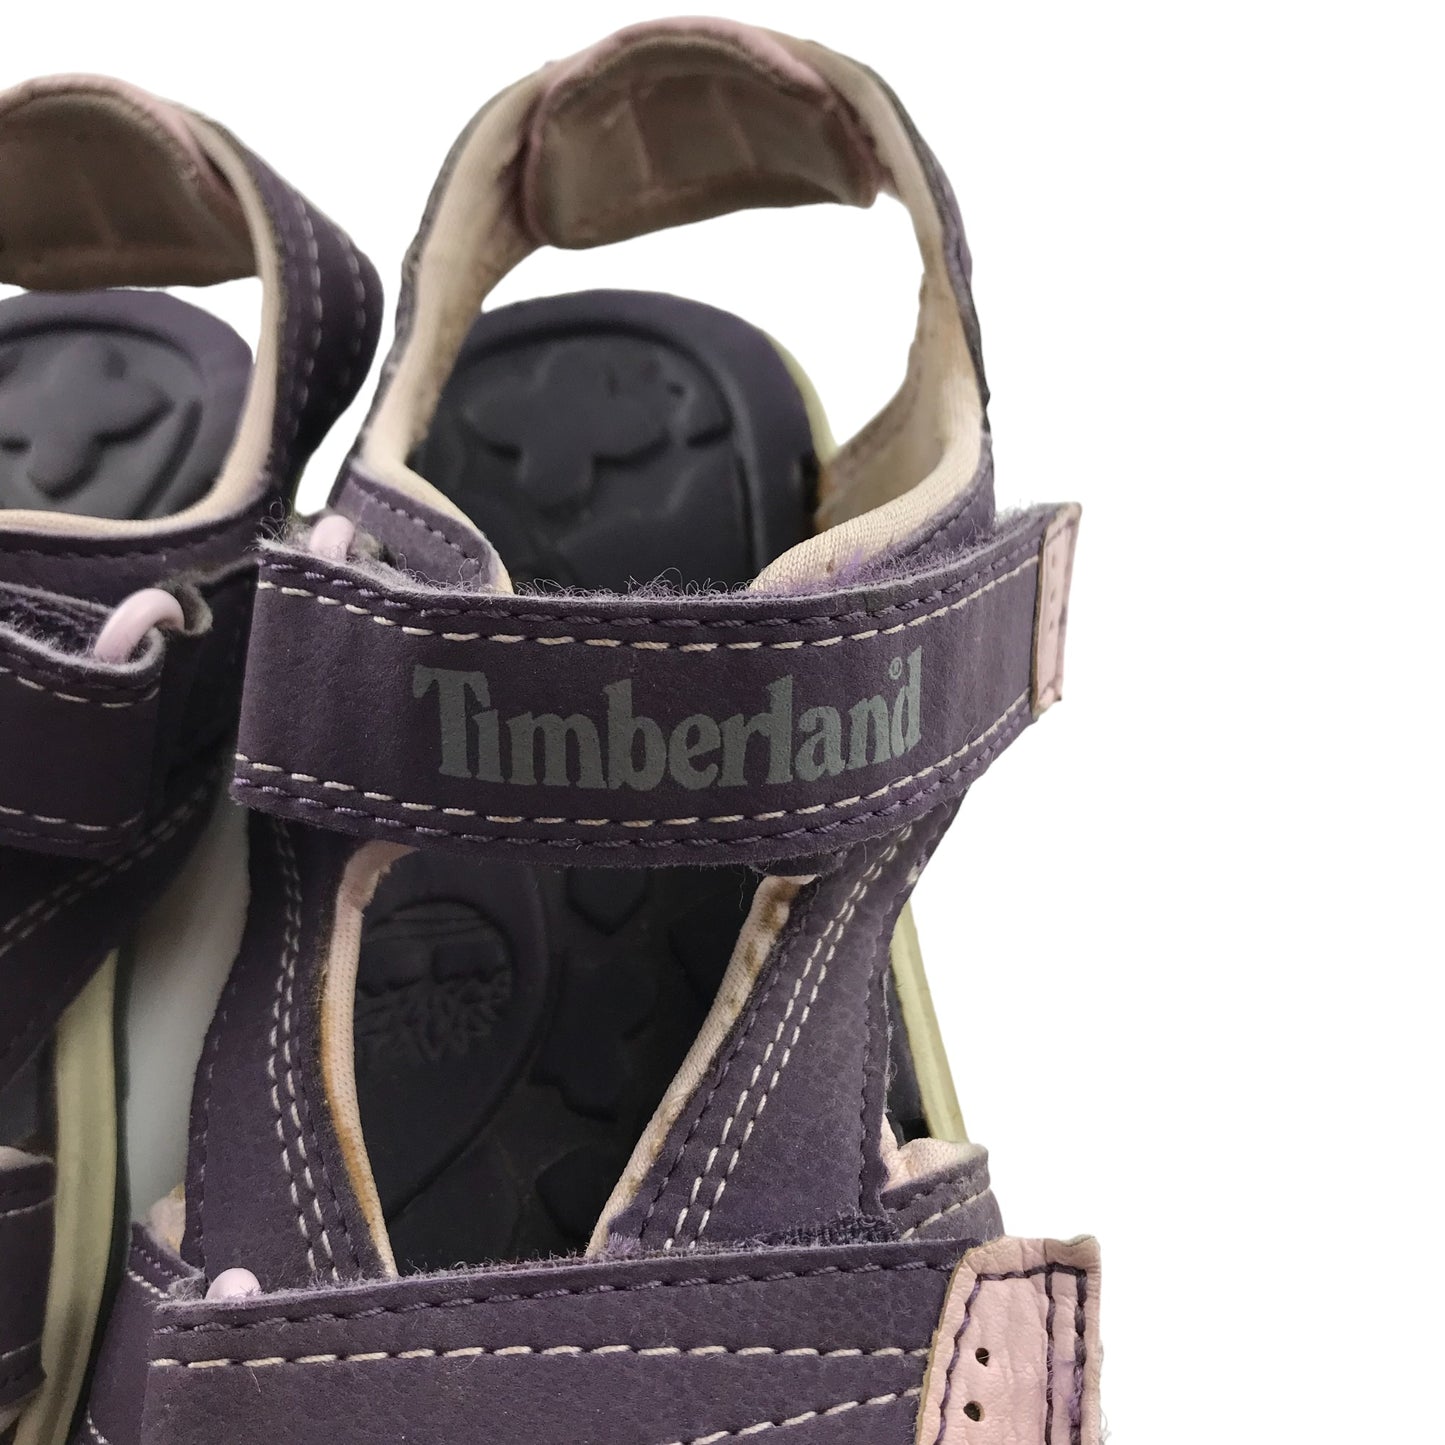 Timberland Sandals Shoe Size 1 Purple with Straps